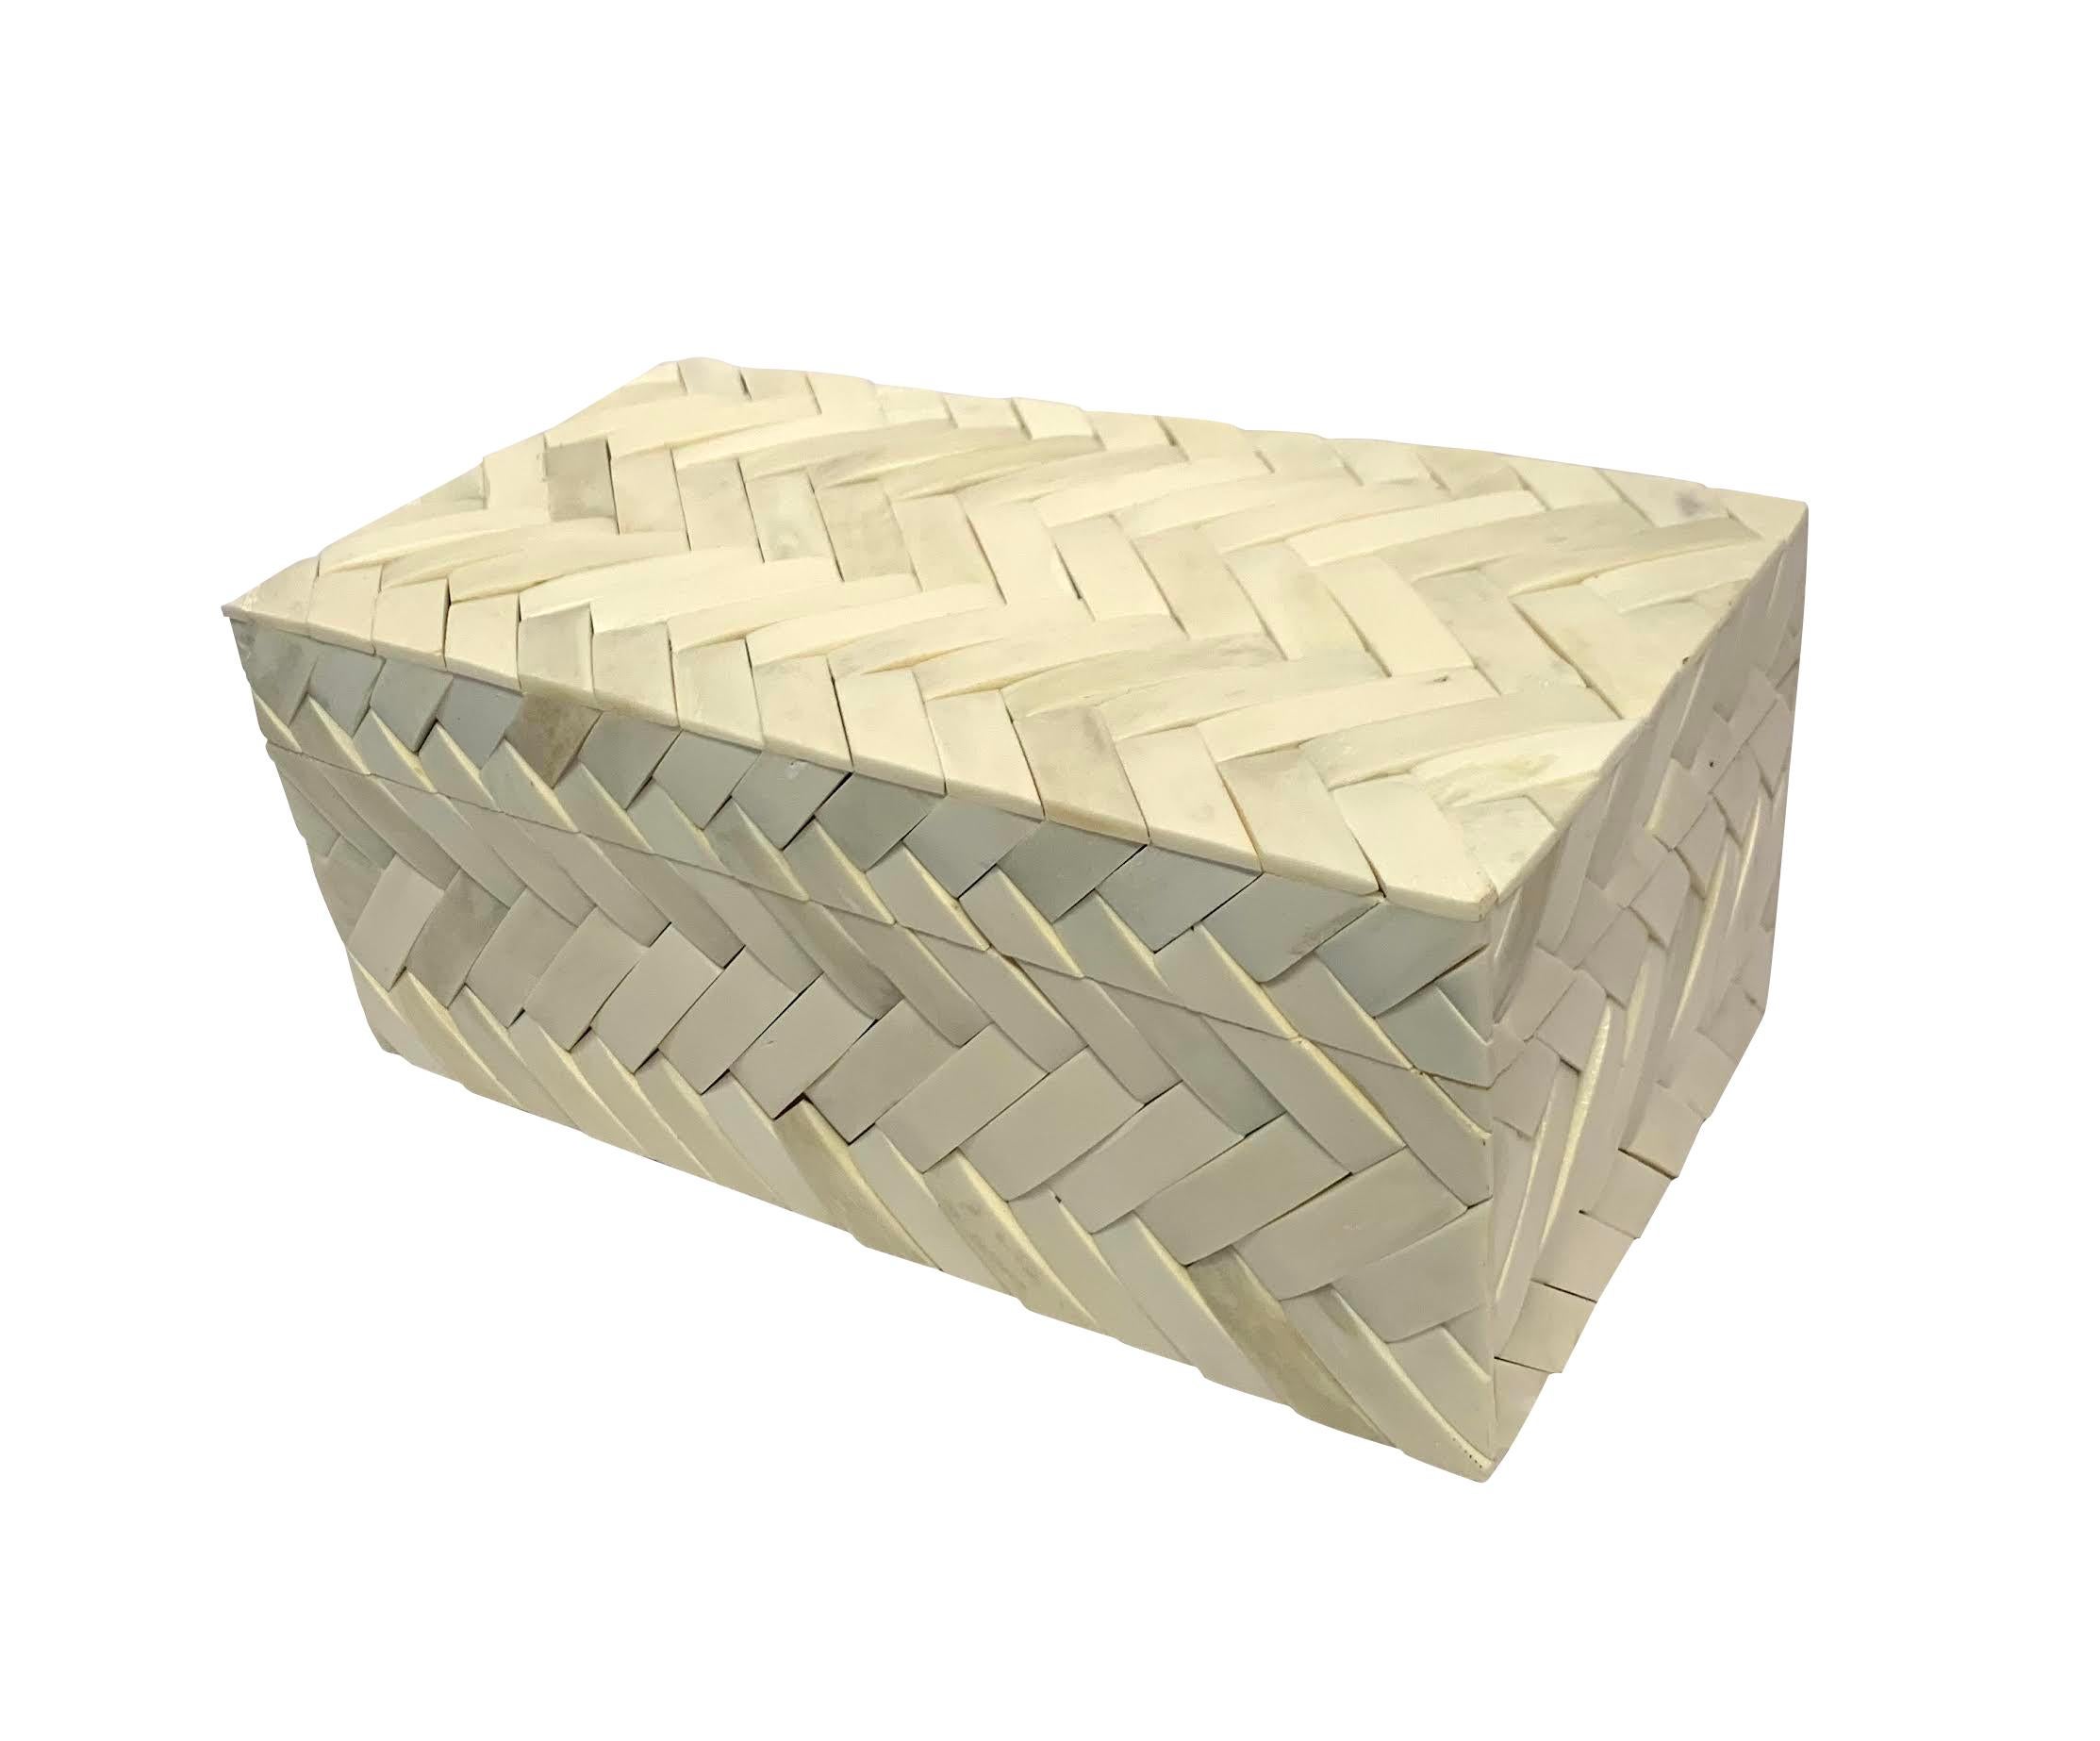 Contemporary Indian braided ivory bone box.
Also available in larger size (S6630 ).
Part of a large collection of bone boxes and trays.